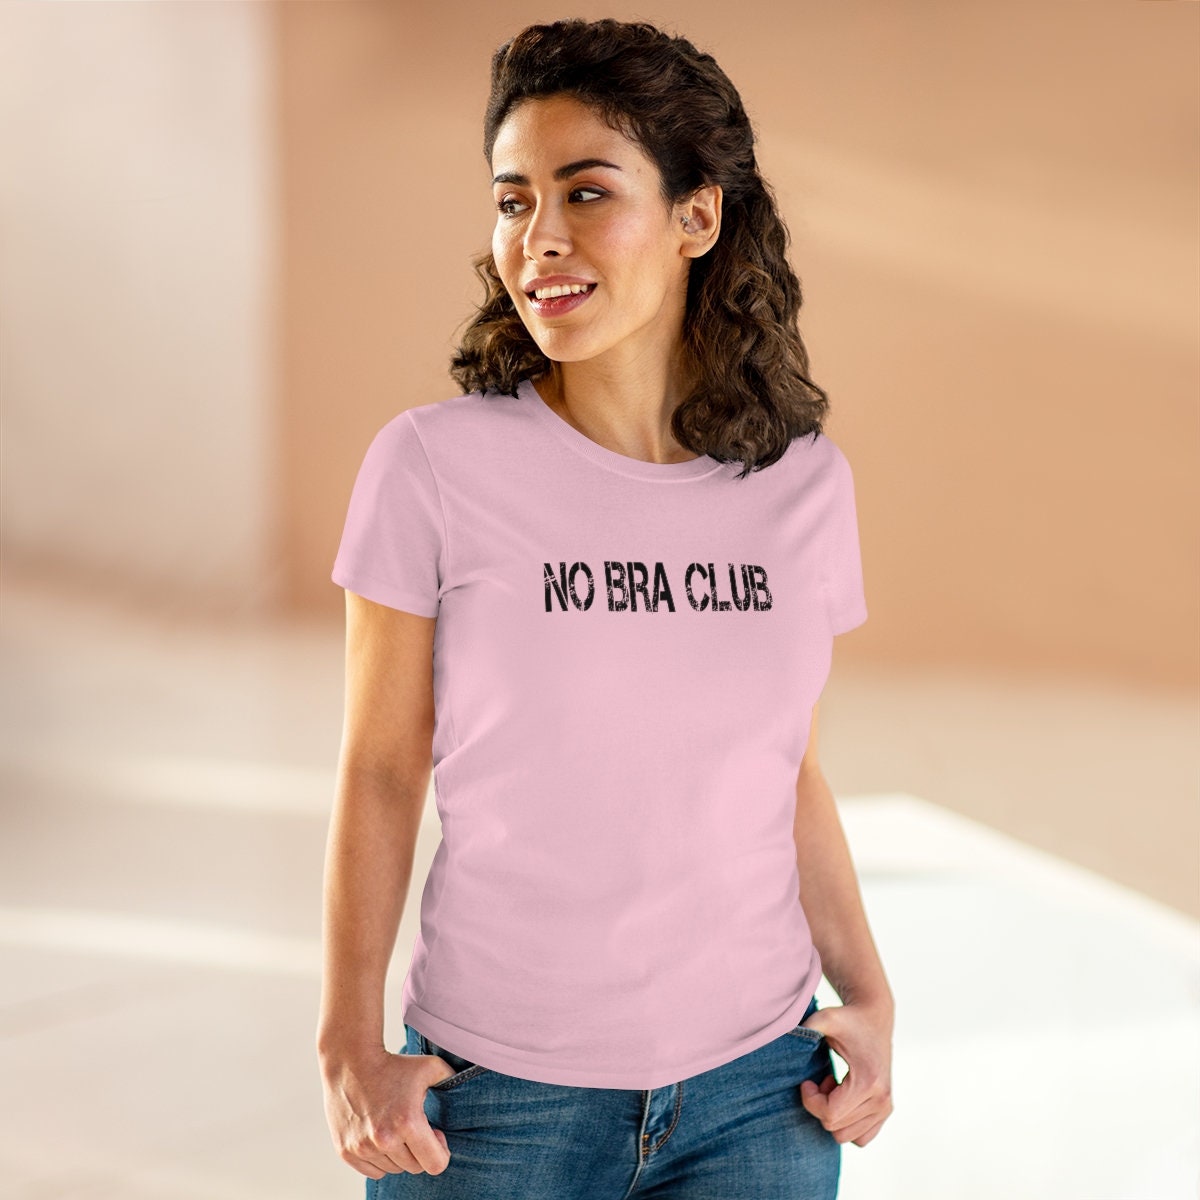 NO BRA CLUB Ladies Fit / Cool / Funny / Gift / T-shirt / Sexy / Eye  Catching / Party / Disco / Beach / Night Out / Hen Night / Tshirt -   Canada